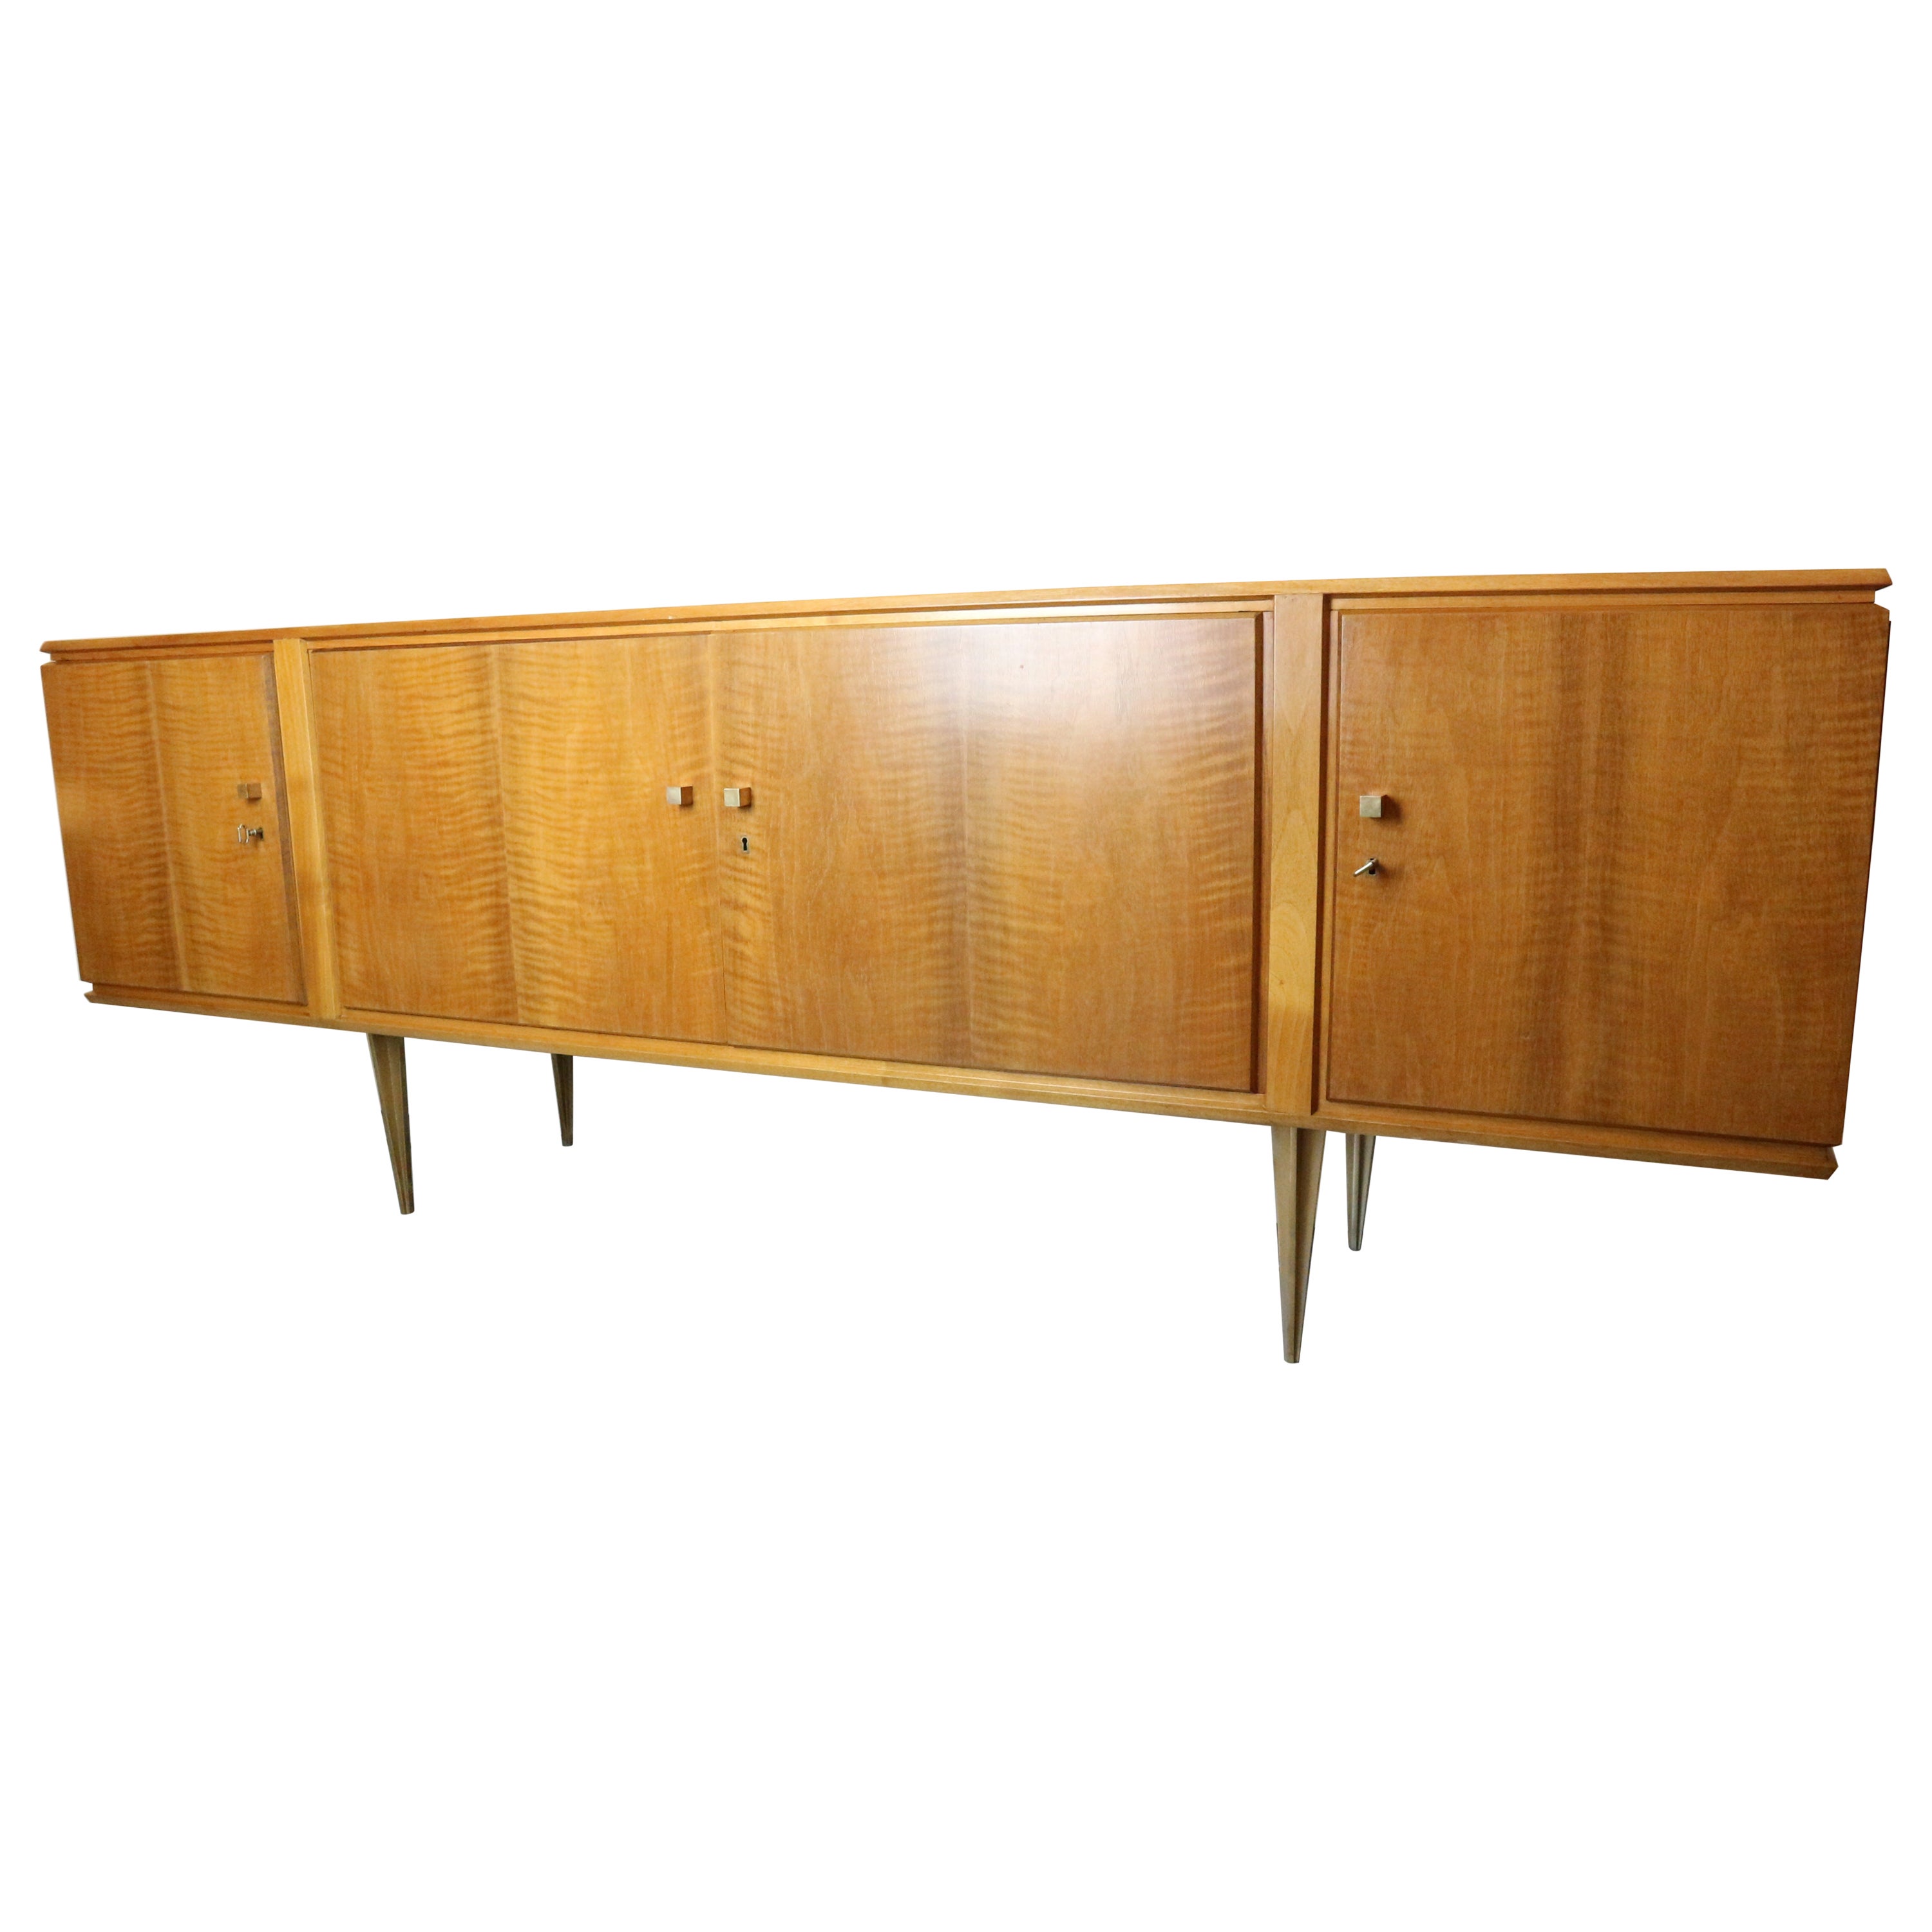 Vintage brass / light wood exclusive sideboard with drawers and shelves, 1960s